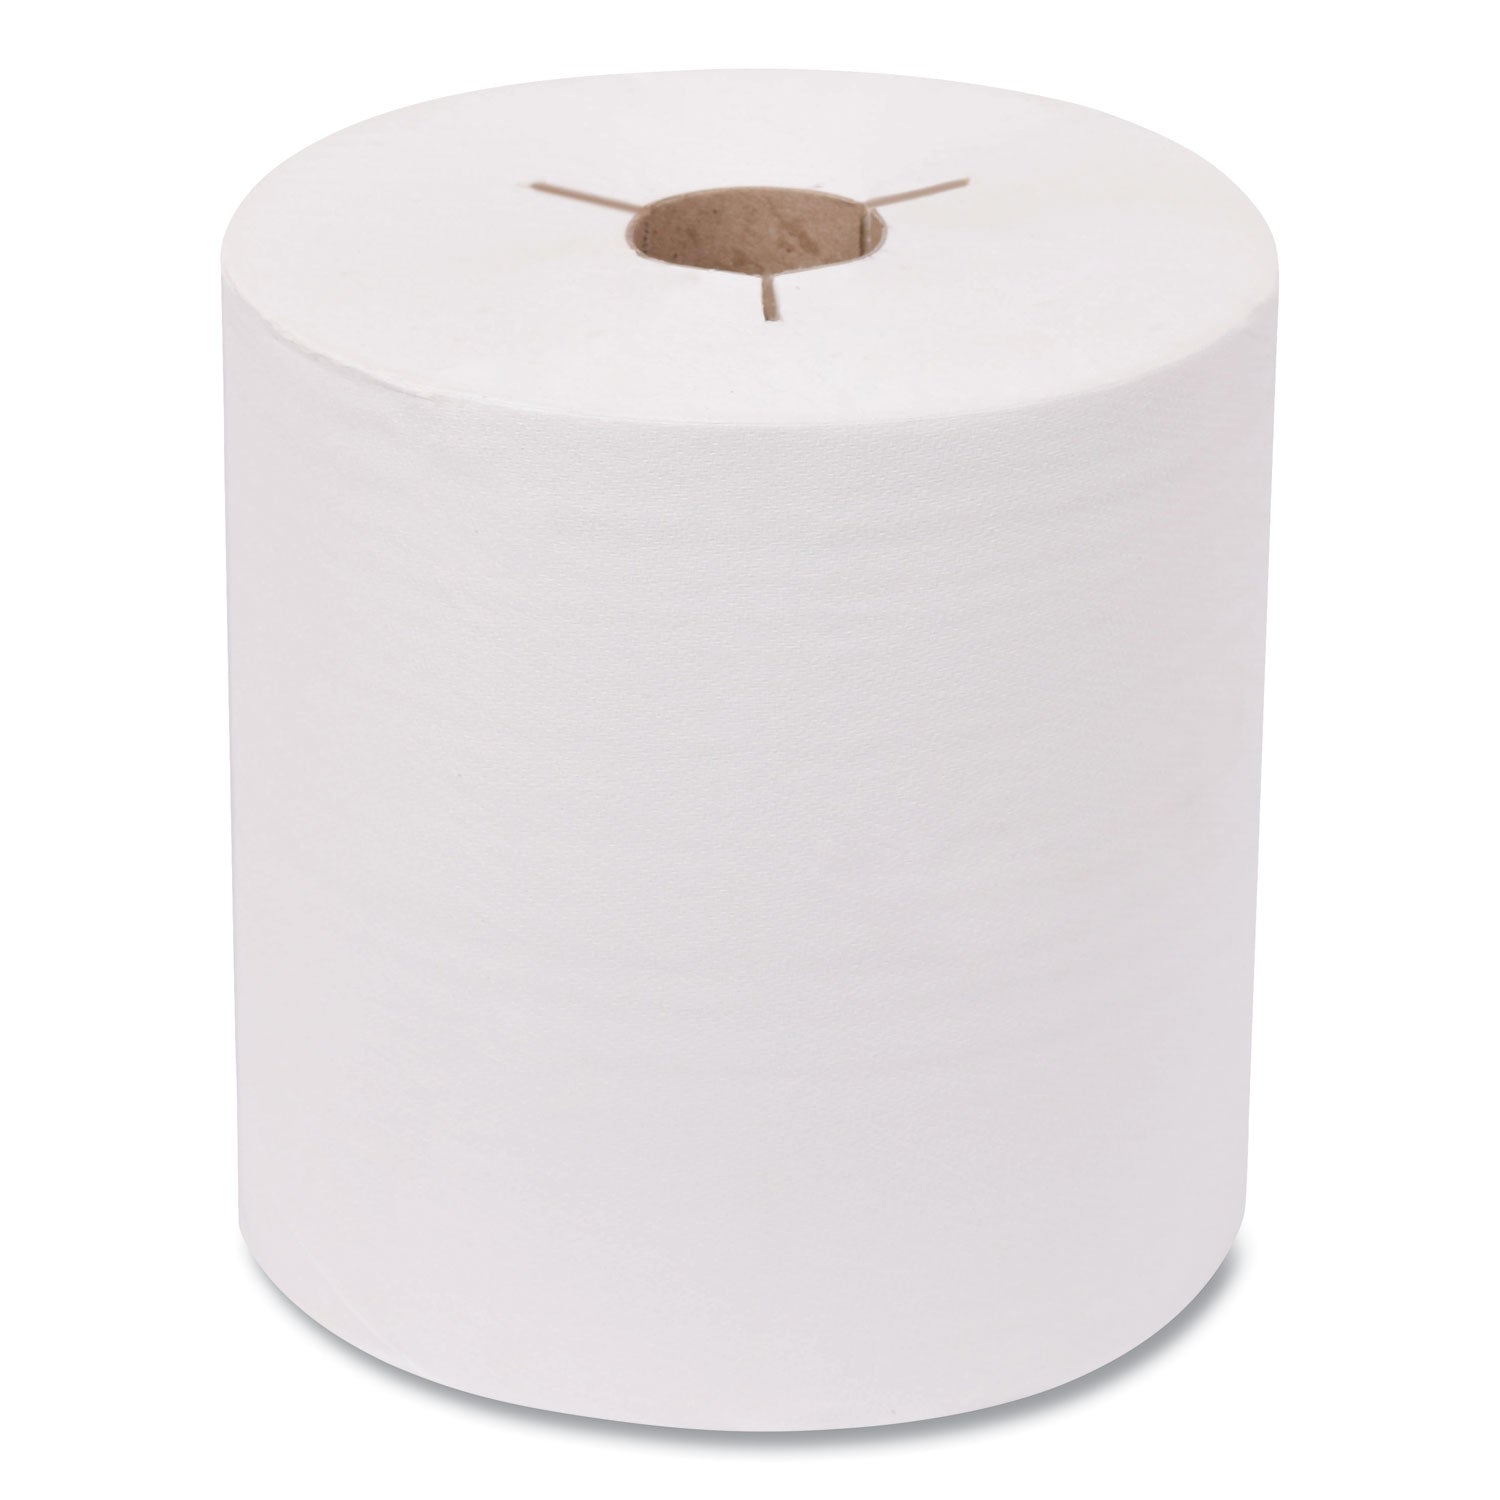 advanced-hand-towel-roll-notched-1-ply-8-x-800-ft-white-6-rolls-carton_trk8038050 - 1